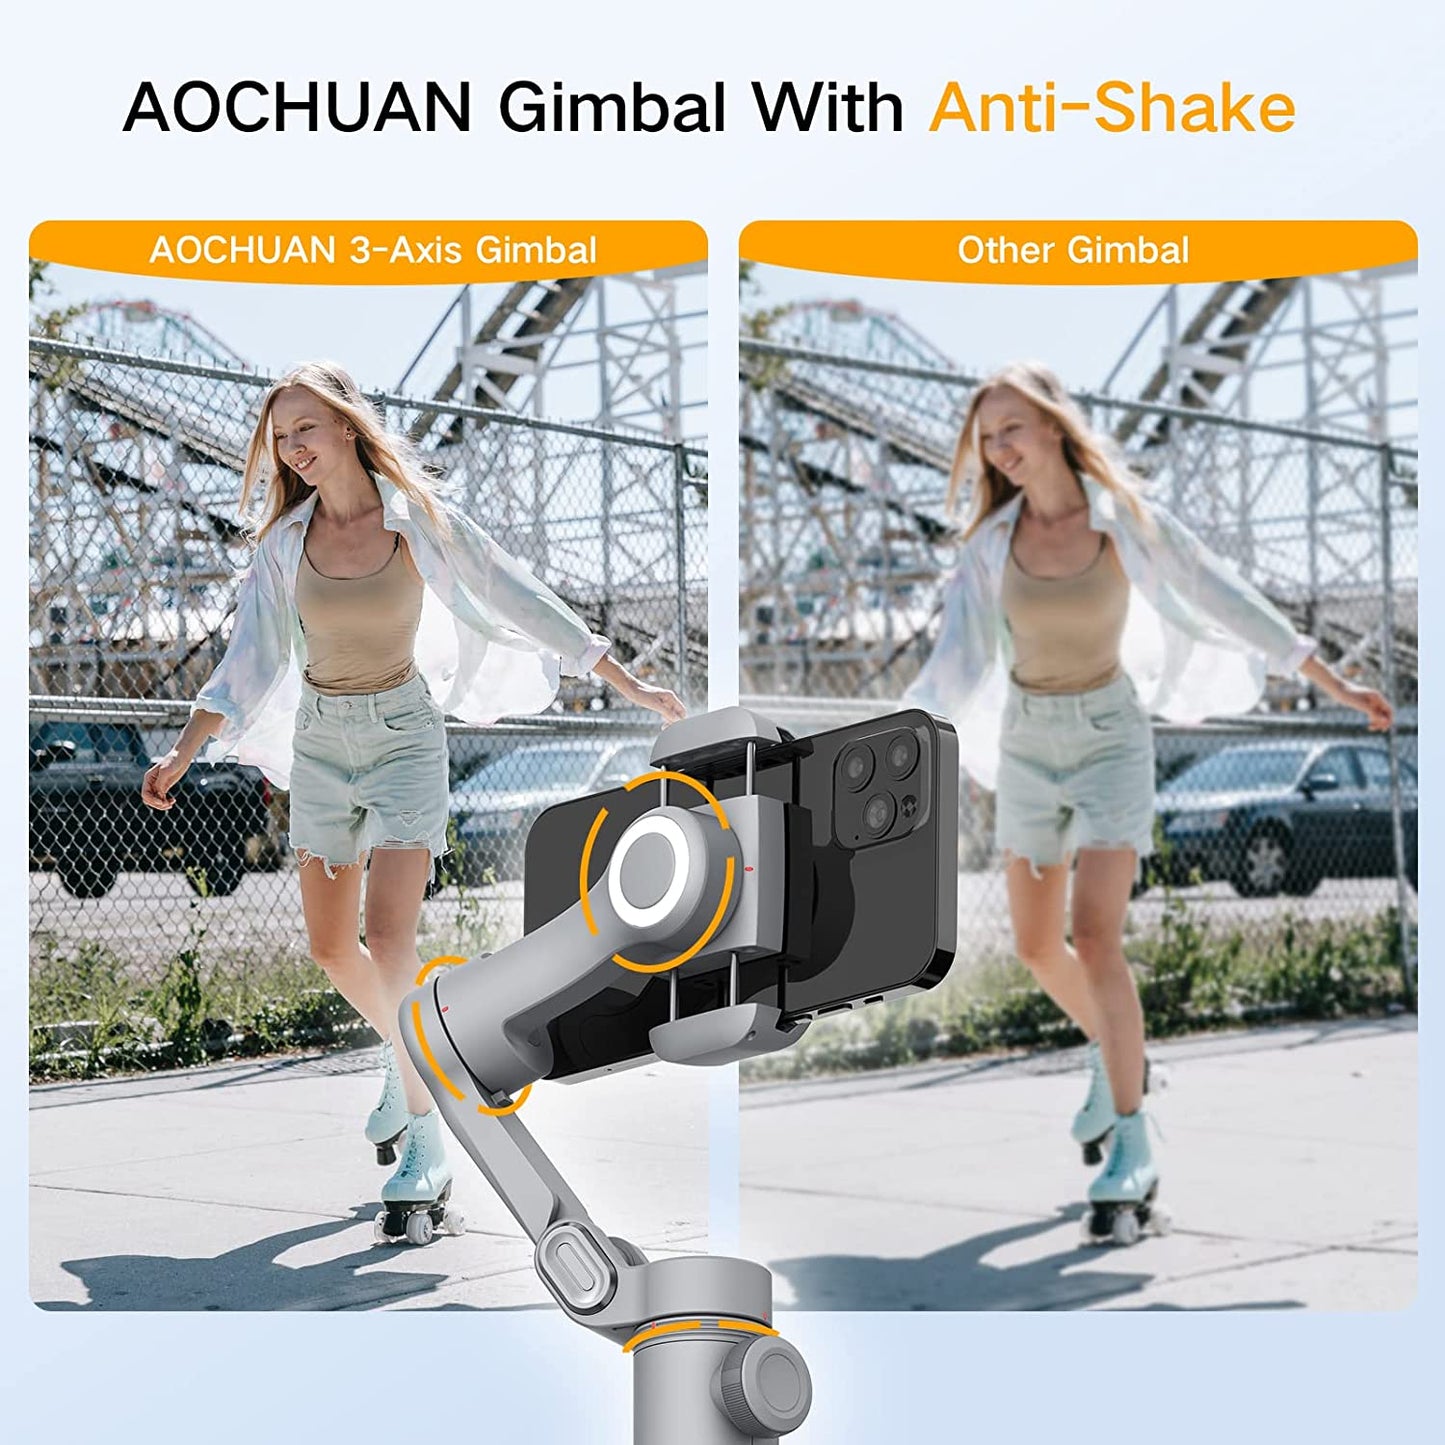 AOCHUAN Smart X Pro Foldable 3-Axis Handheld Gimbal Stabilizer